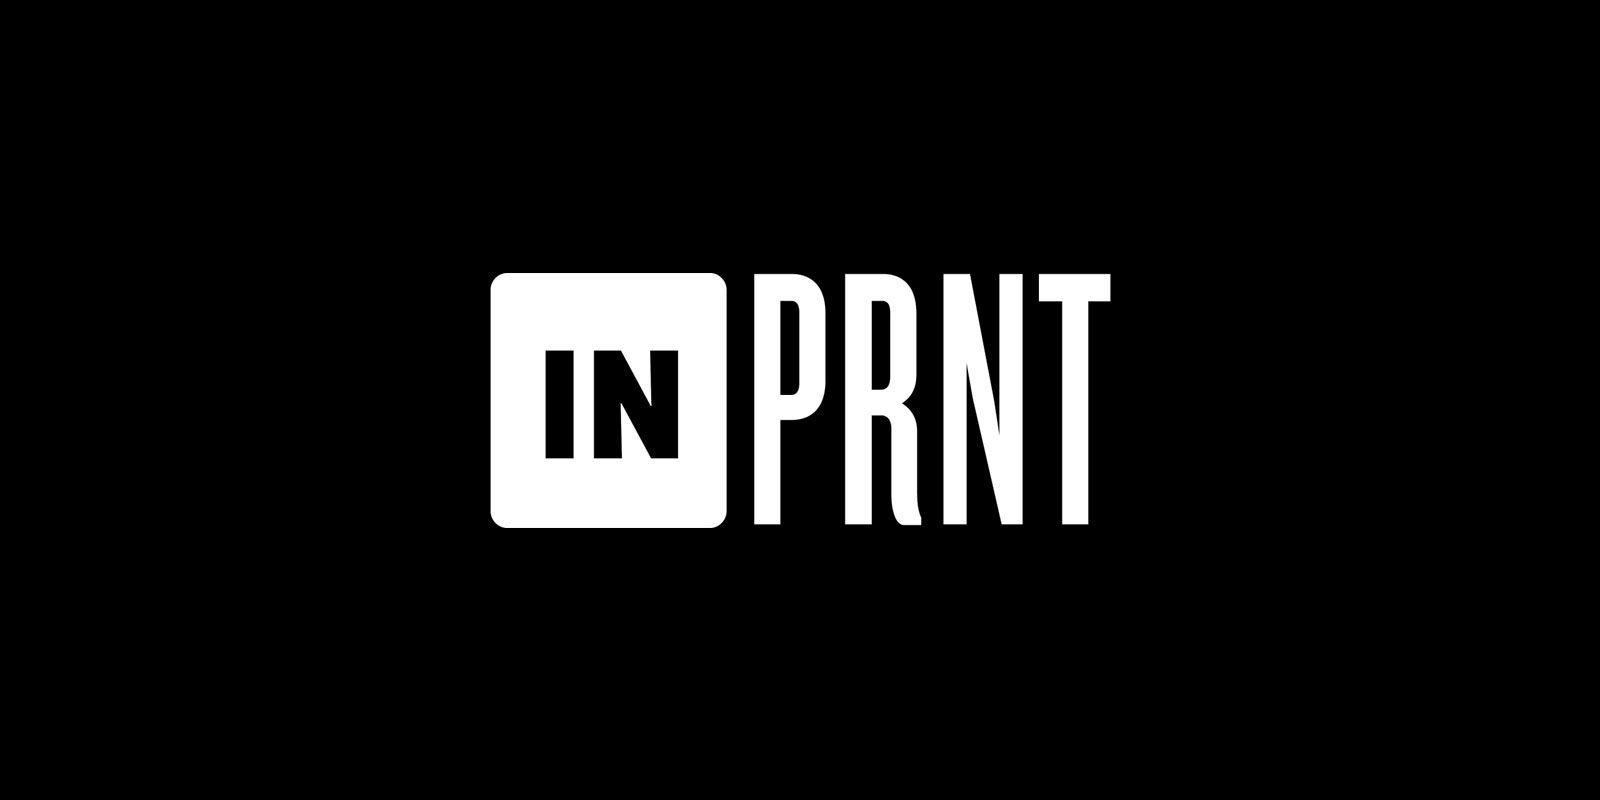 Inprnt is now the second company